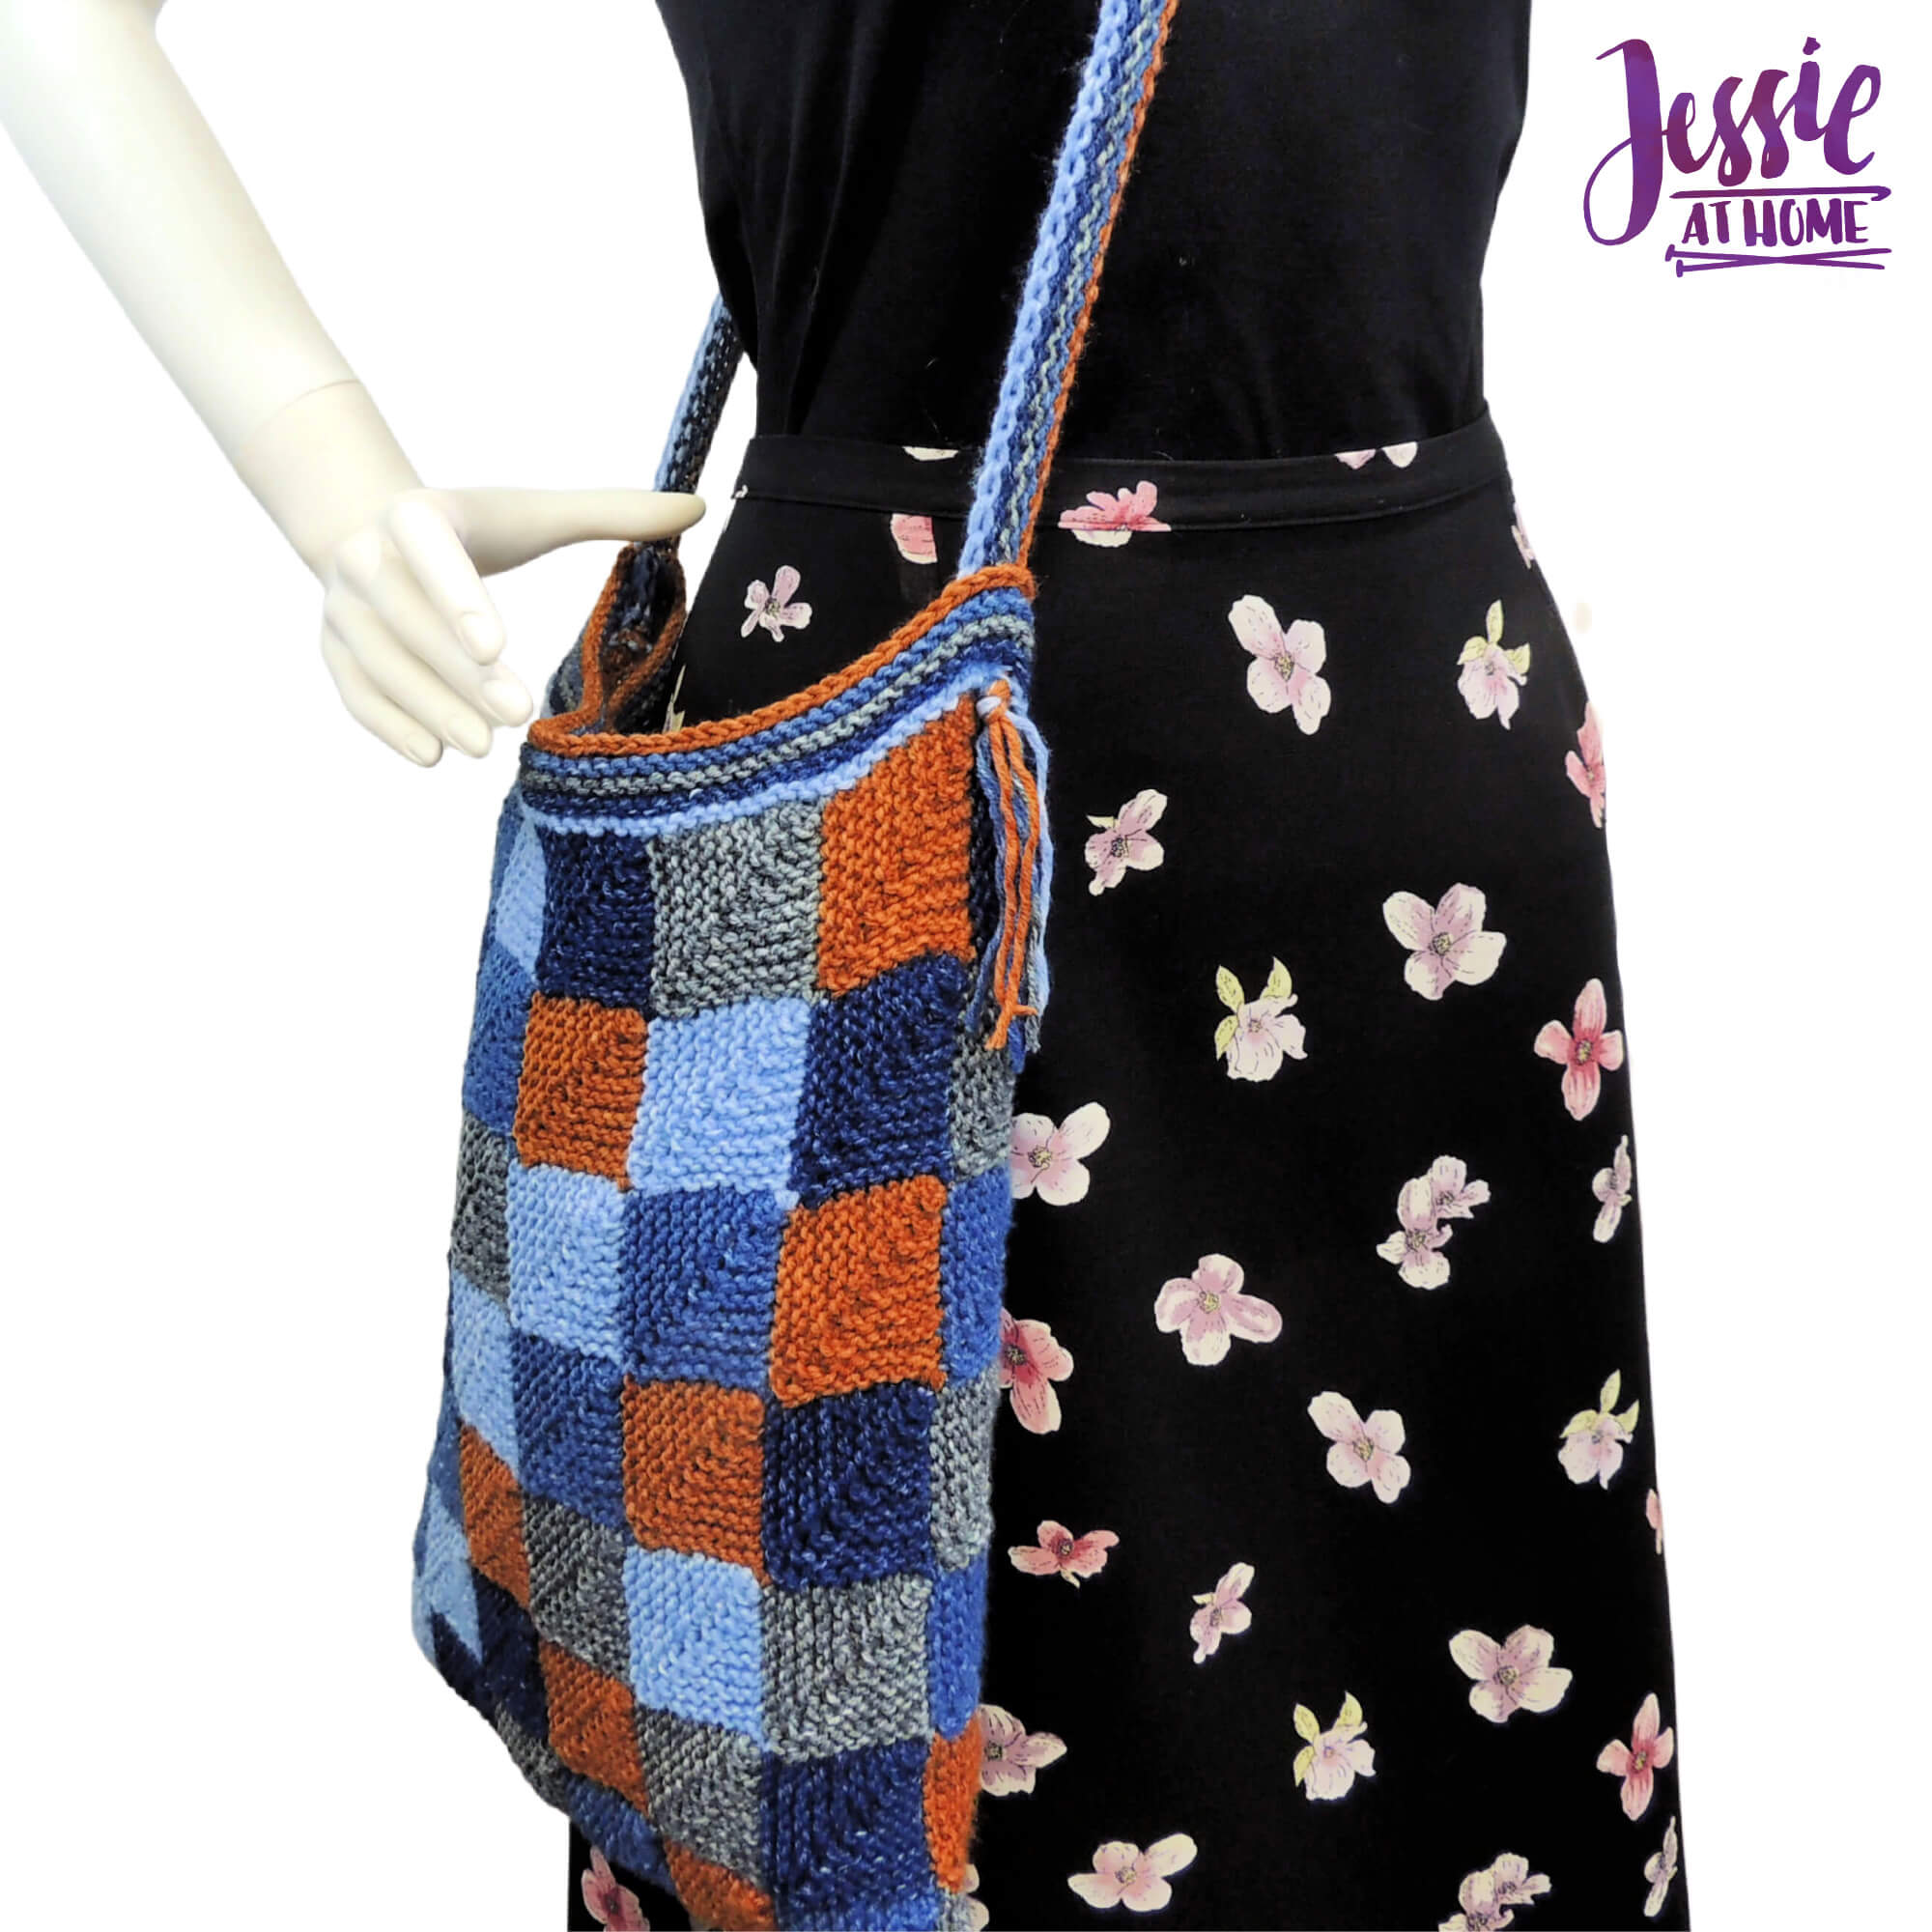 Jean Dreams Tote knit pattern by Jessie At Home - 1